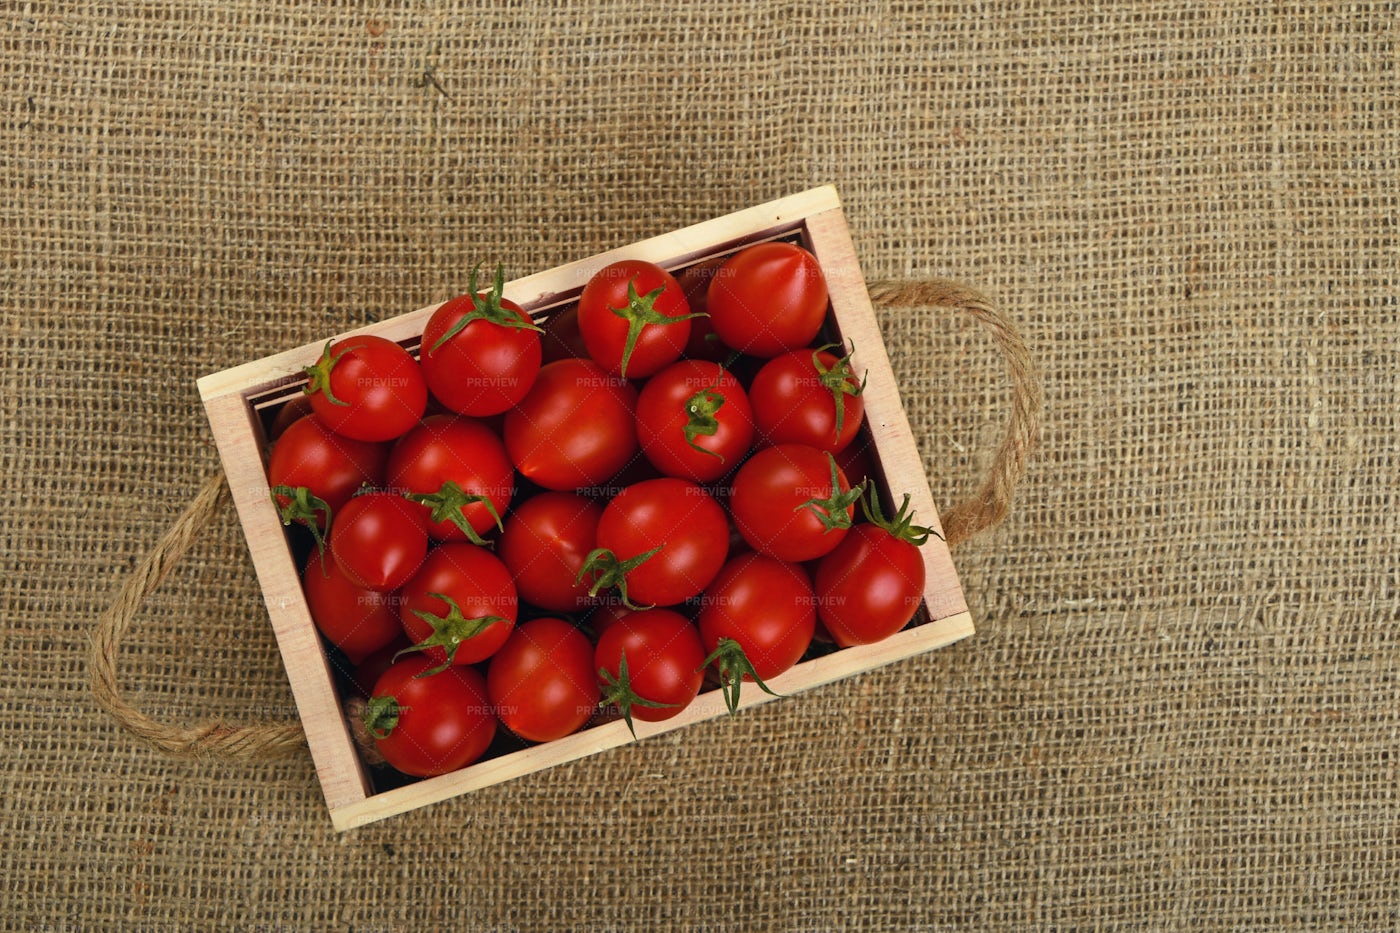 Cherry Tomatoes In A Wooden Box: Stock Photos